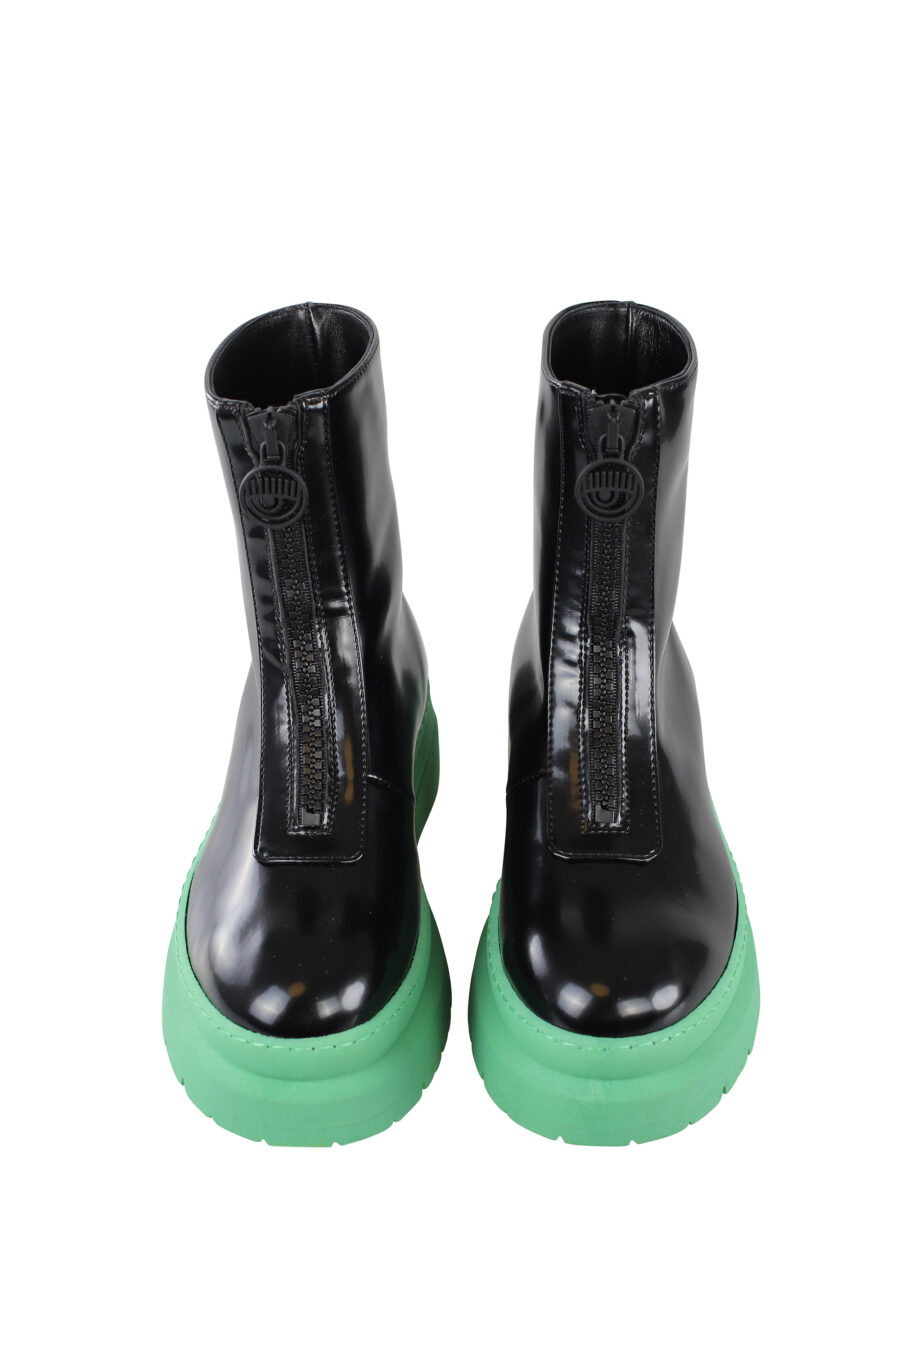 Black vegan leather ankle boots with green sole - IMG 6687